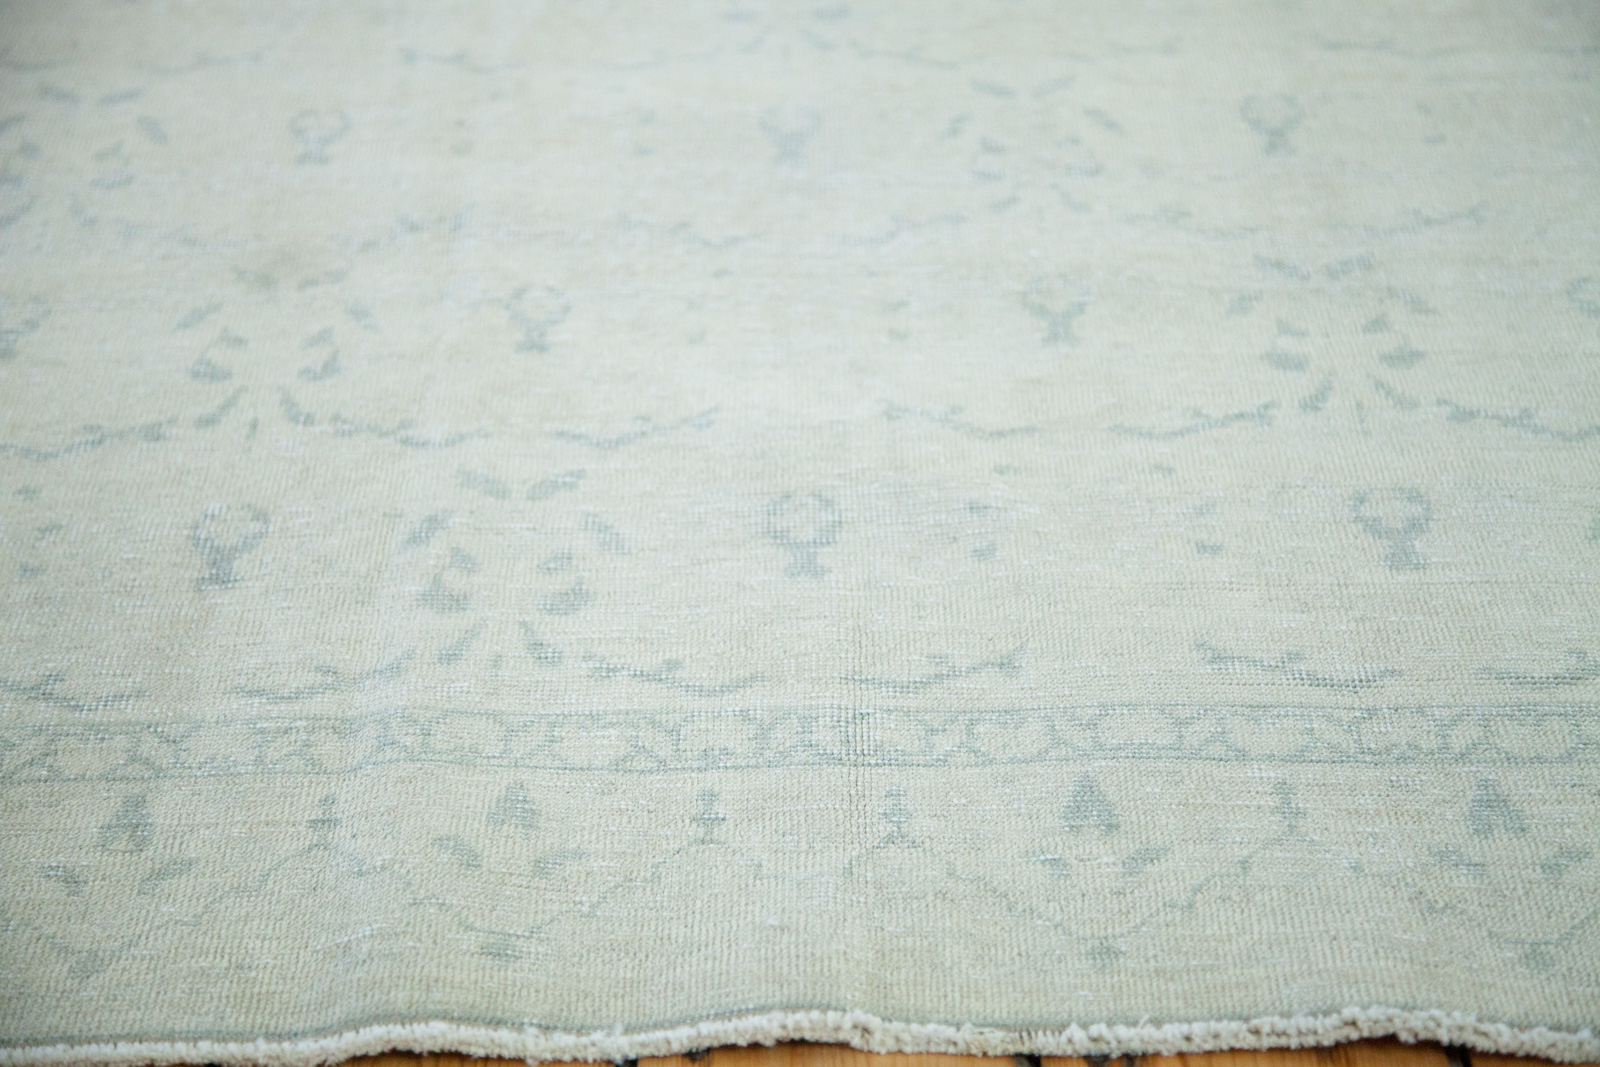 Blanched Turkish Rug